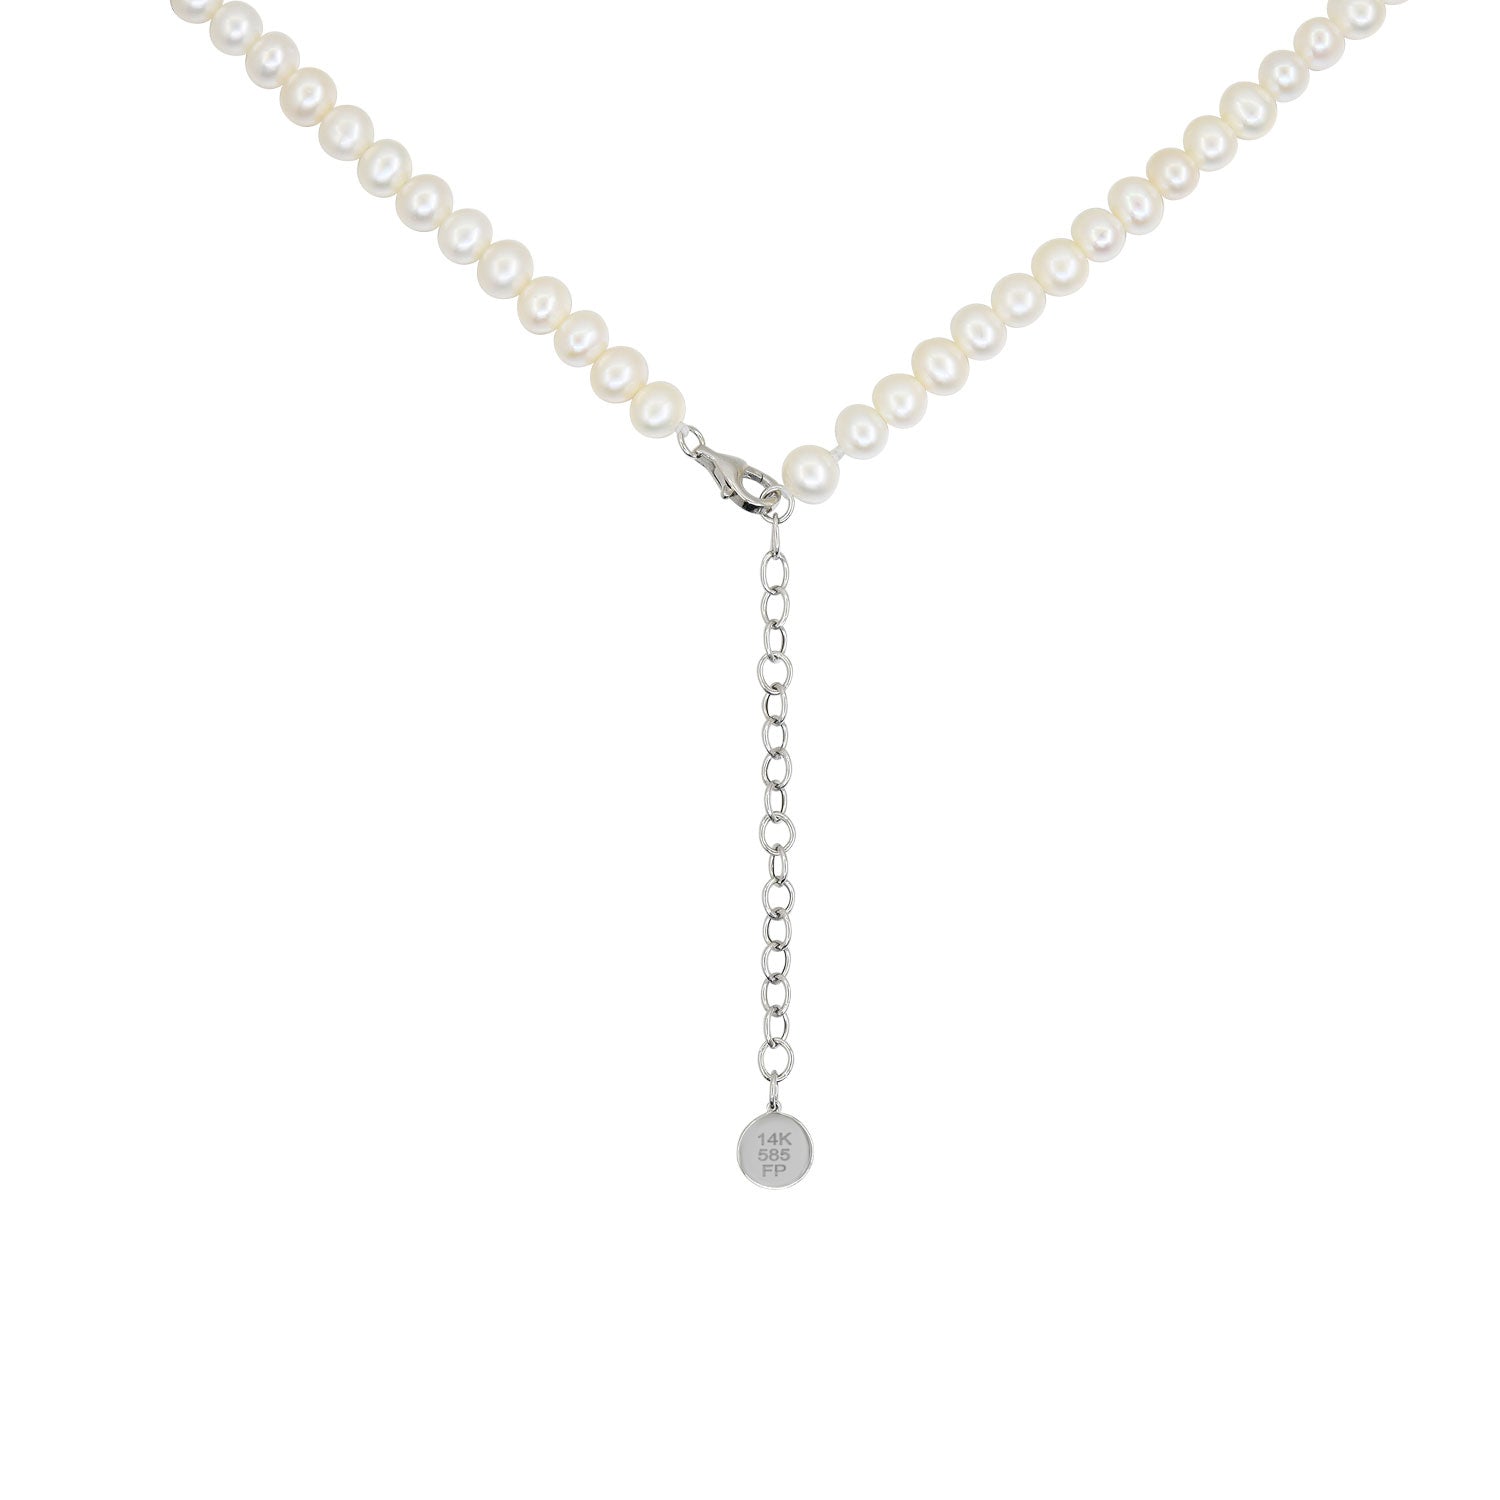 pearl_fifth_crussex_necklace_14k_white_gold_4